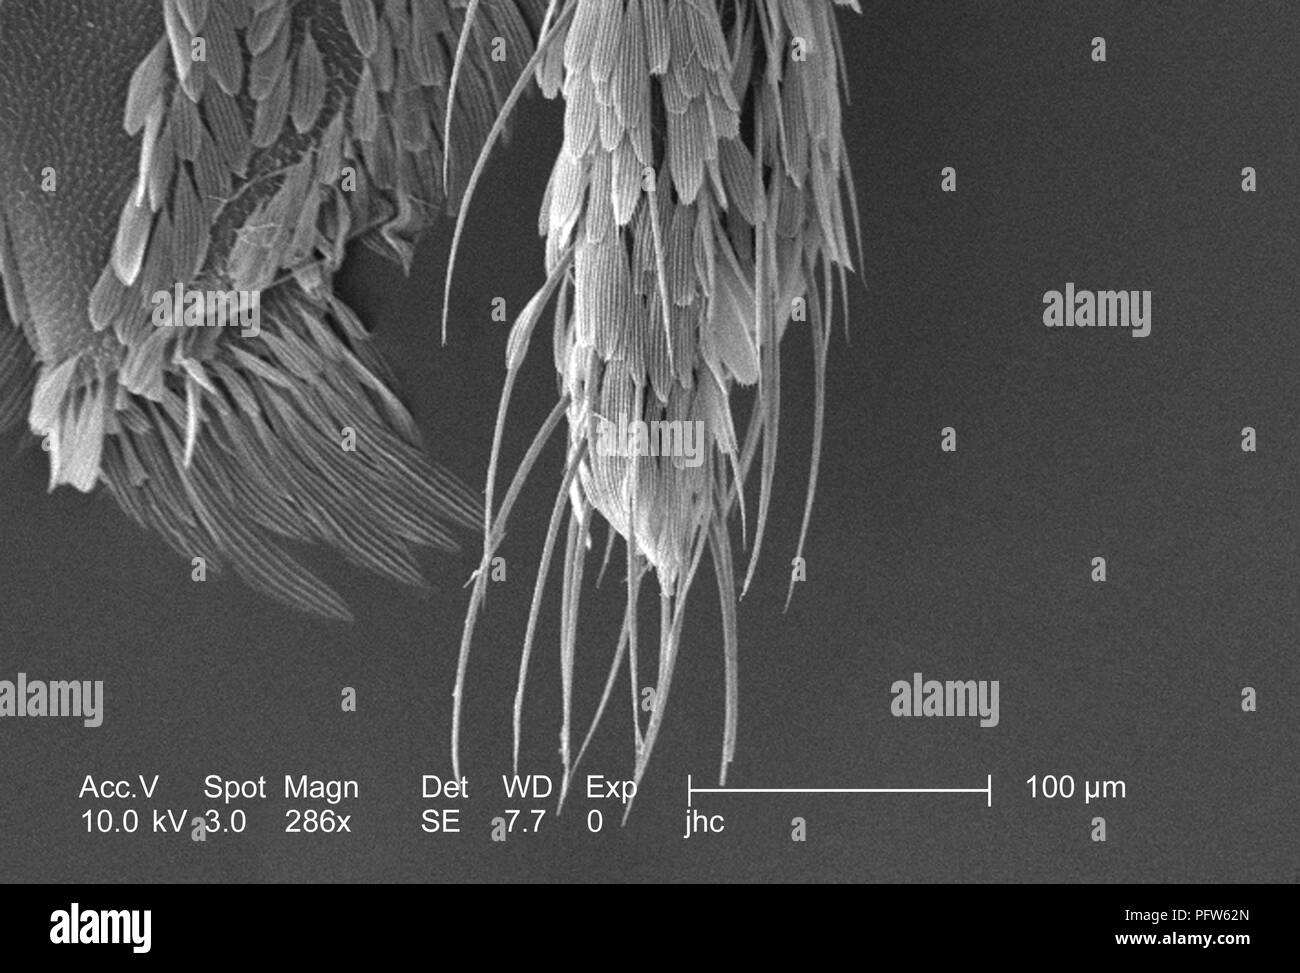 Morphologic features on the exoskeletal surface of an Anopheles dirus mosquito's distal tip, revealed in the 286x magnified scanning electron microscopic (SEM) image, 2006. Image courtesy Centers for Disease Control (CDC) / Paul Howell. () Stock Photo